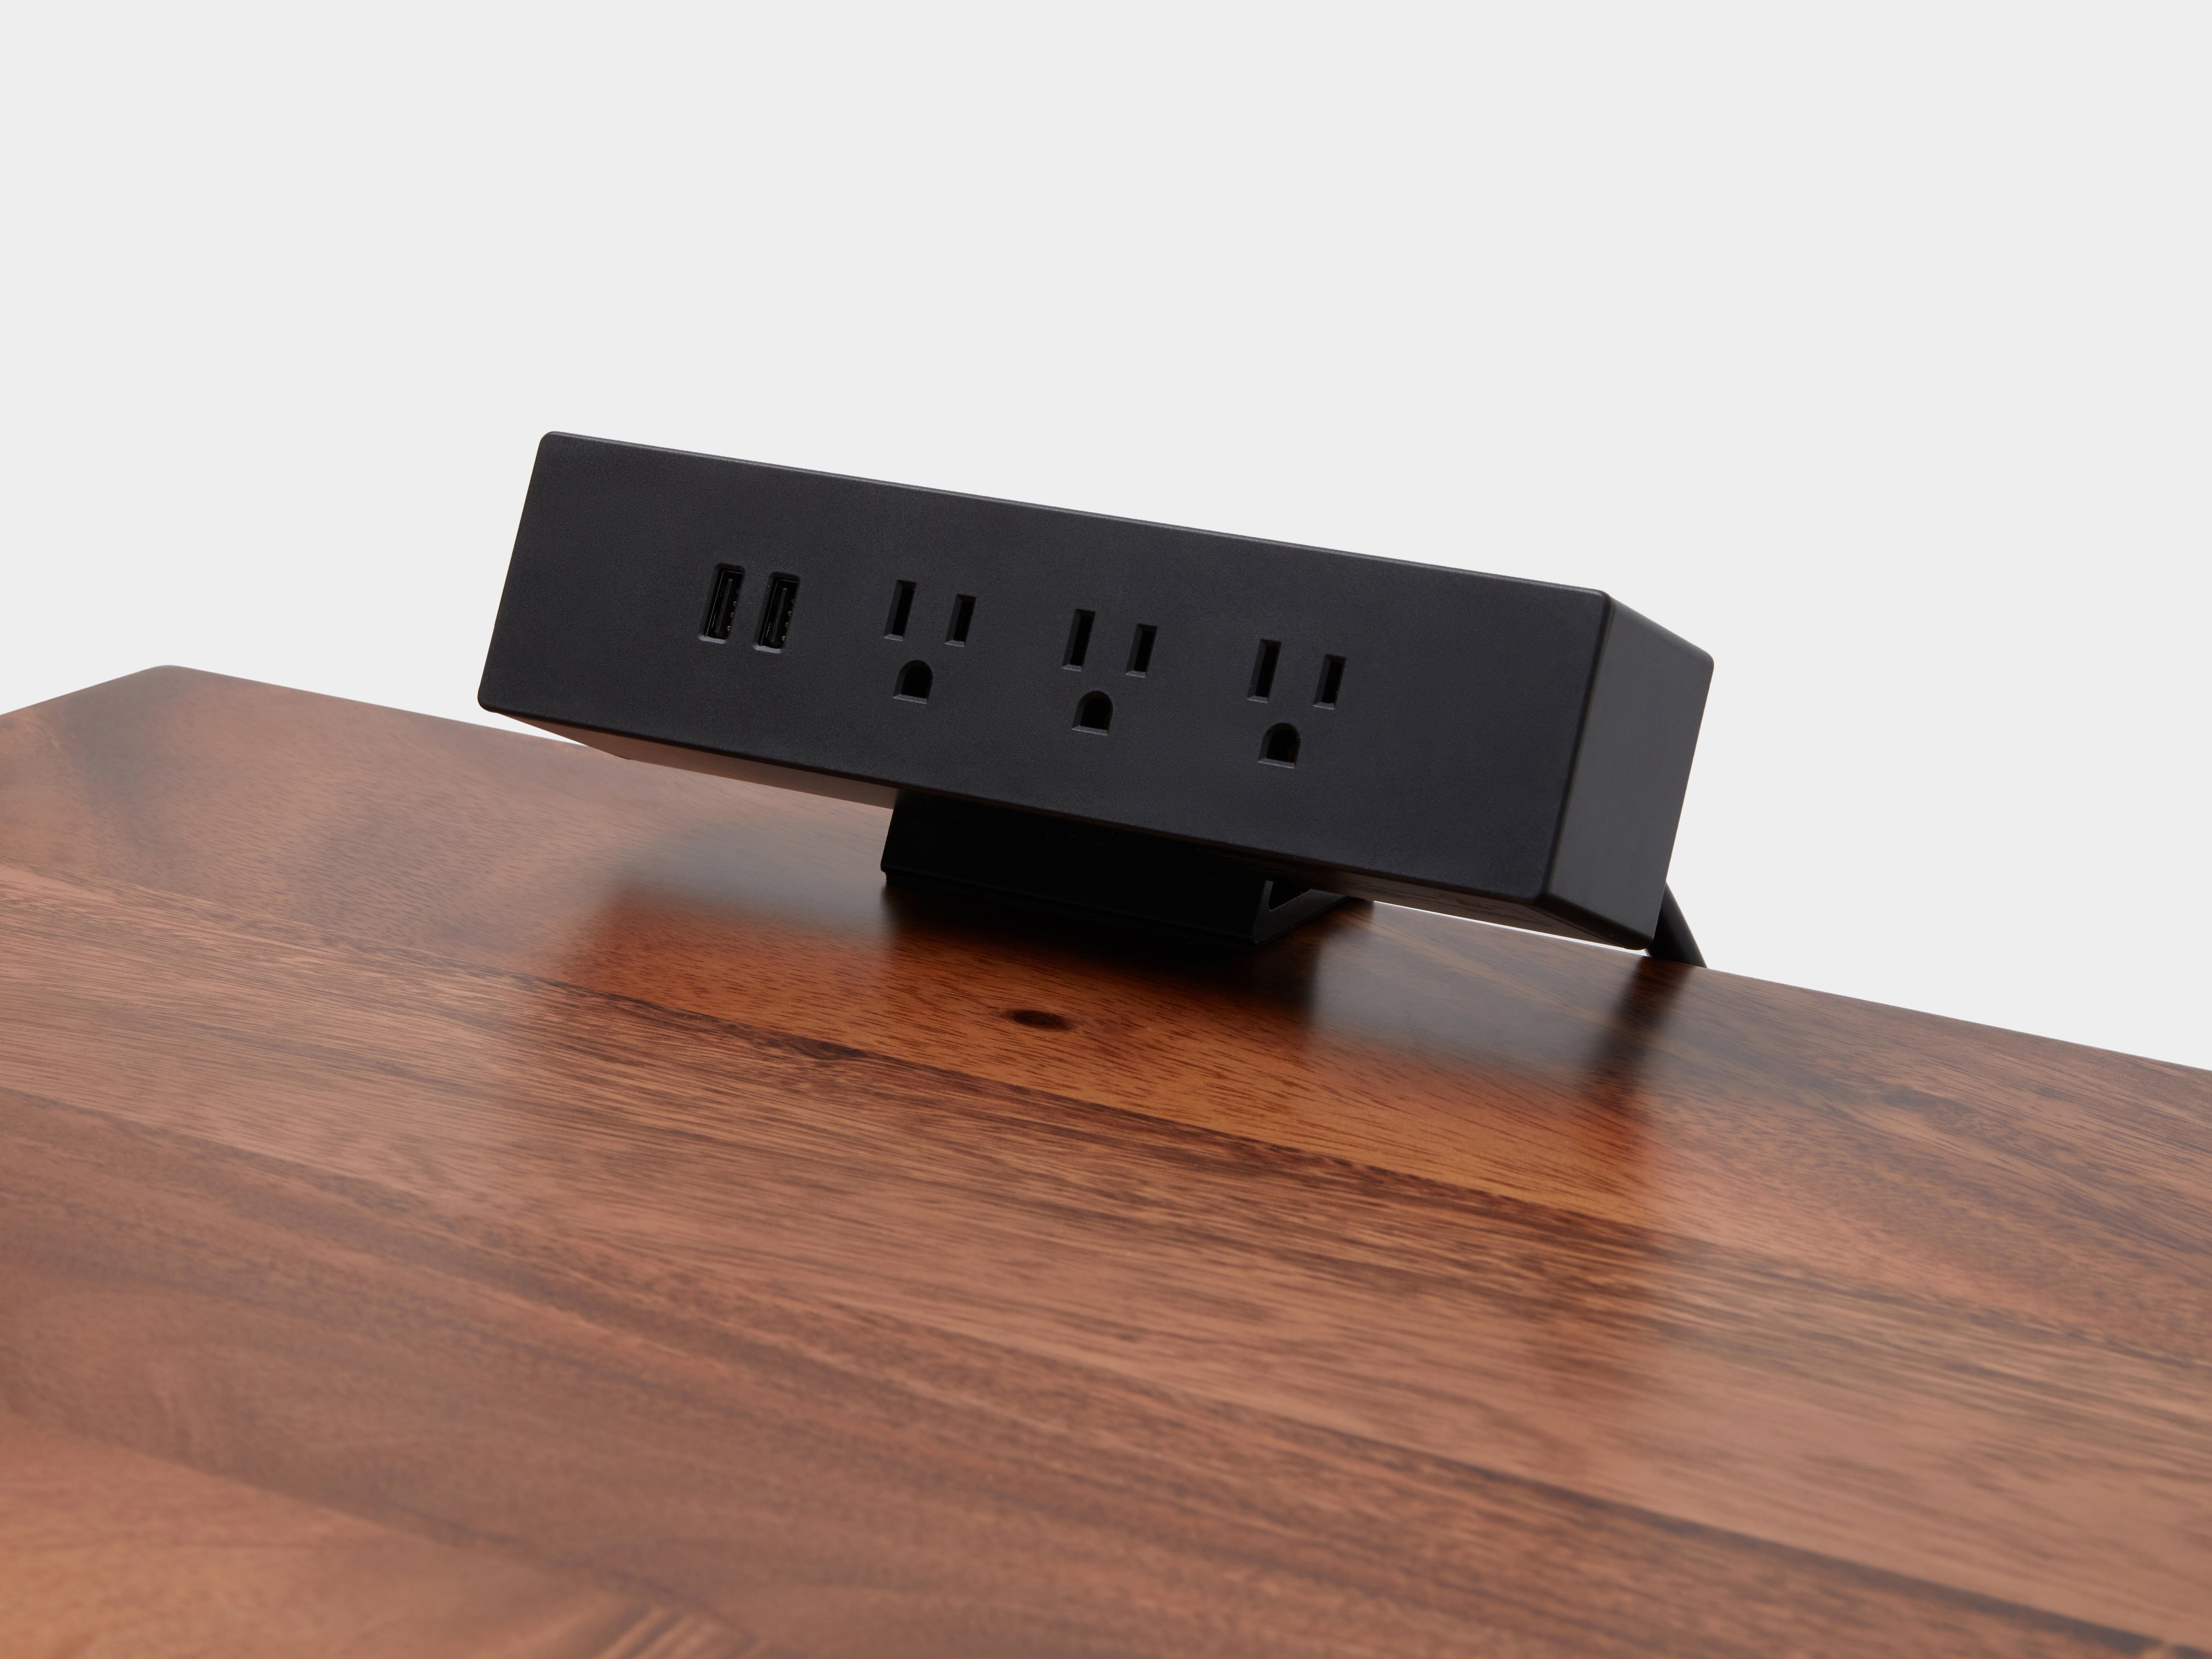 Clamp-Mounted Surge Protector
VORII